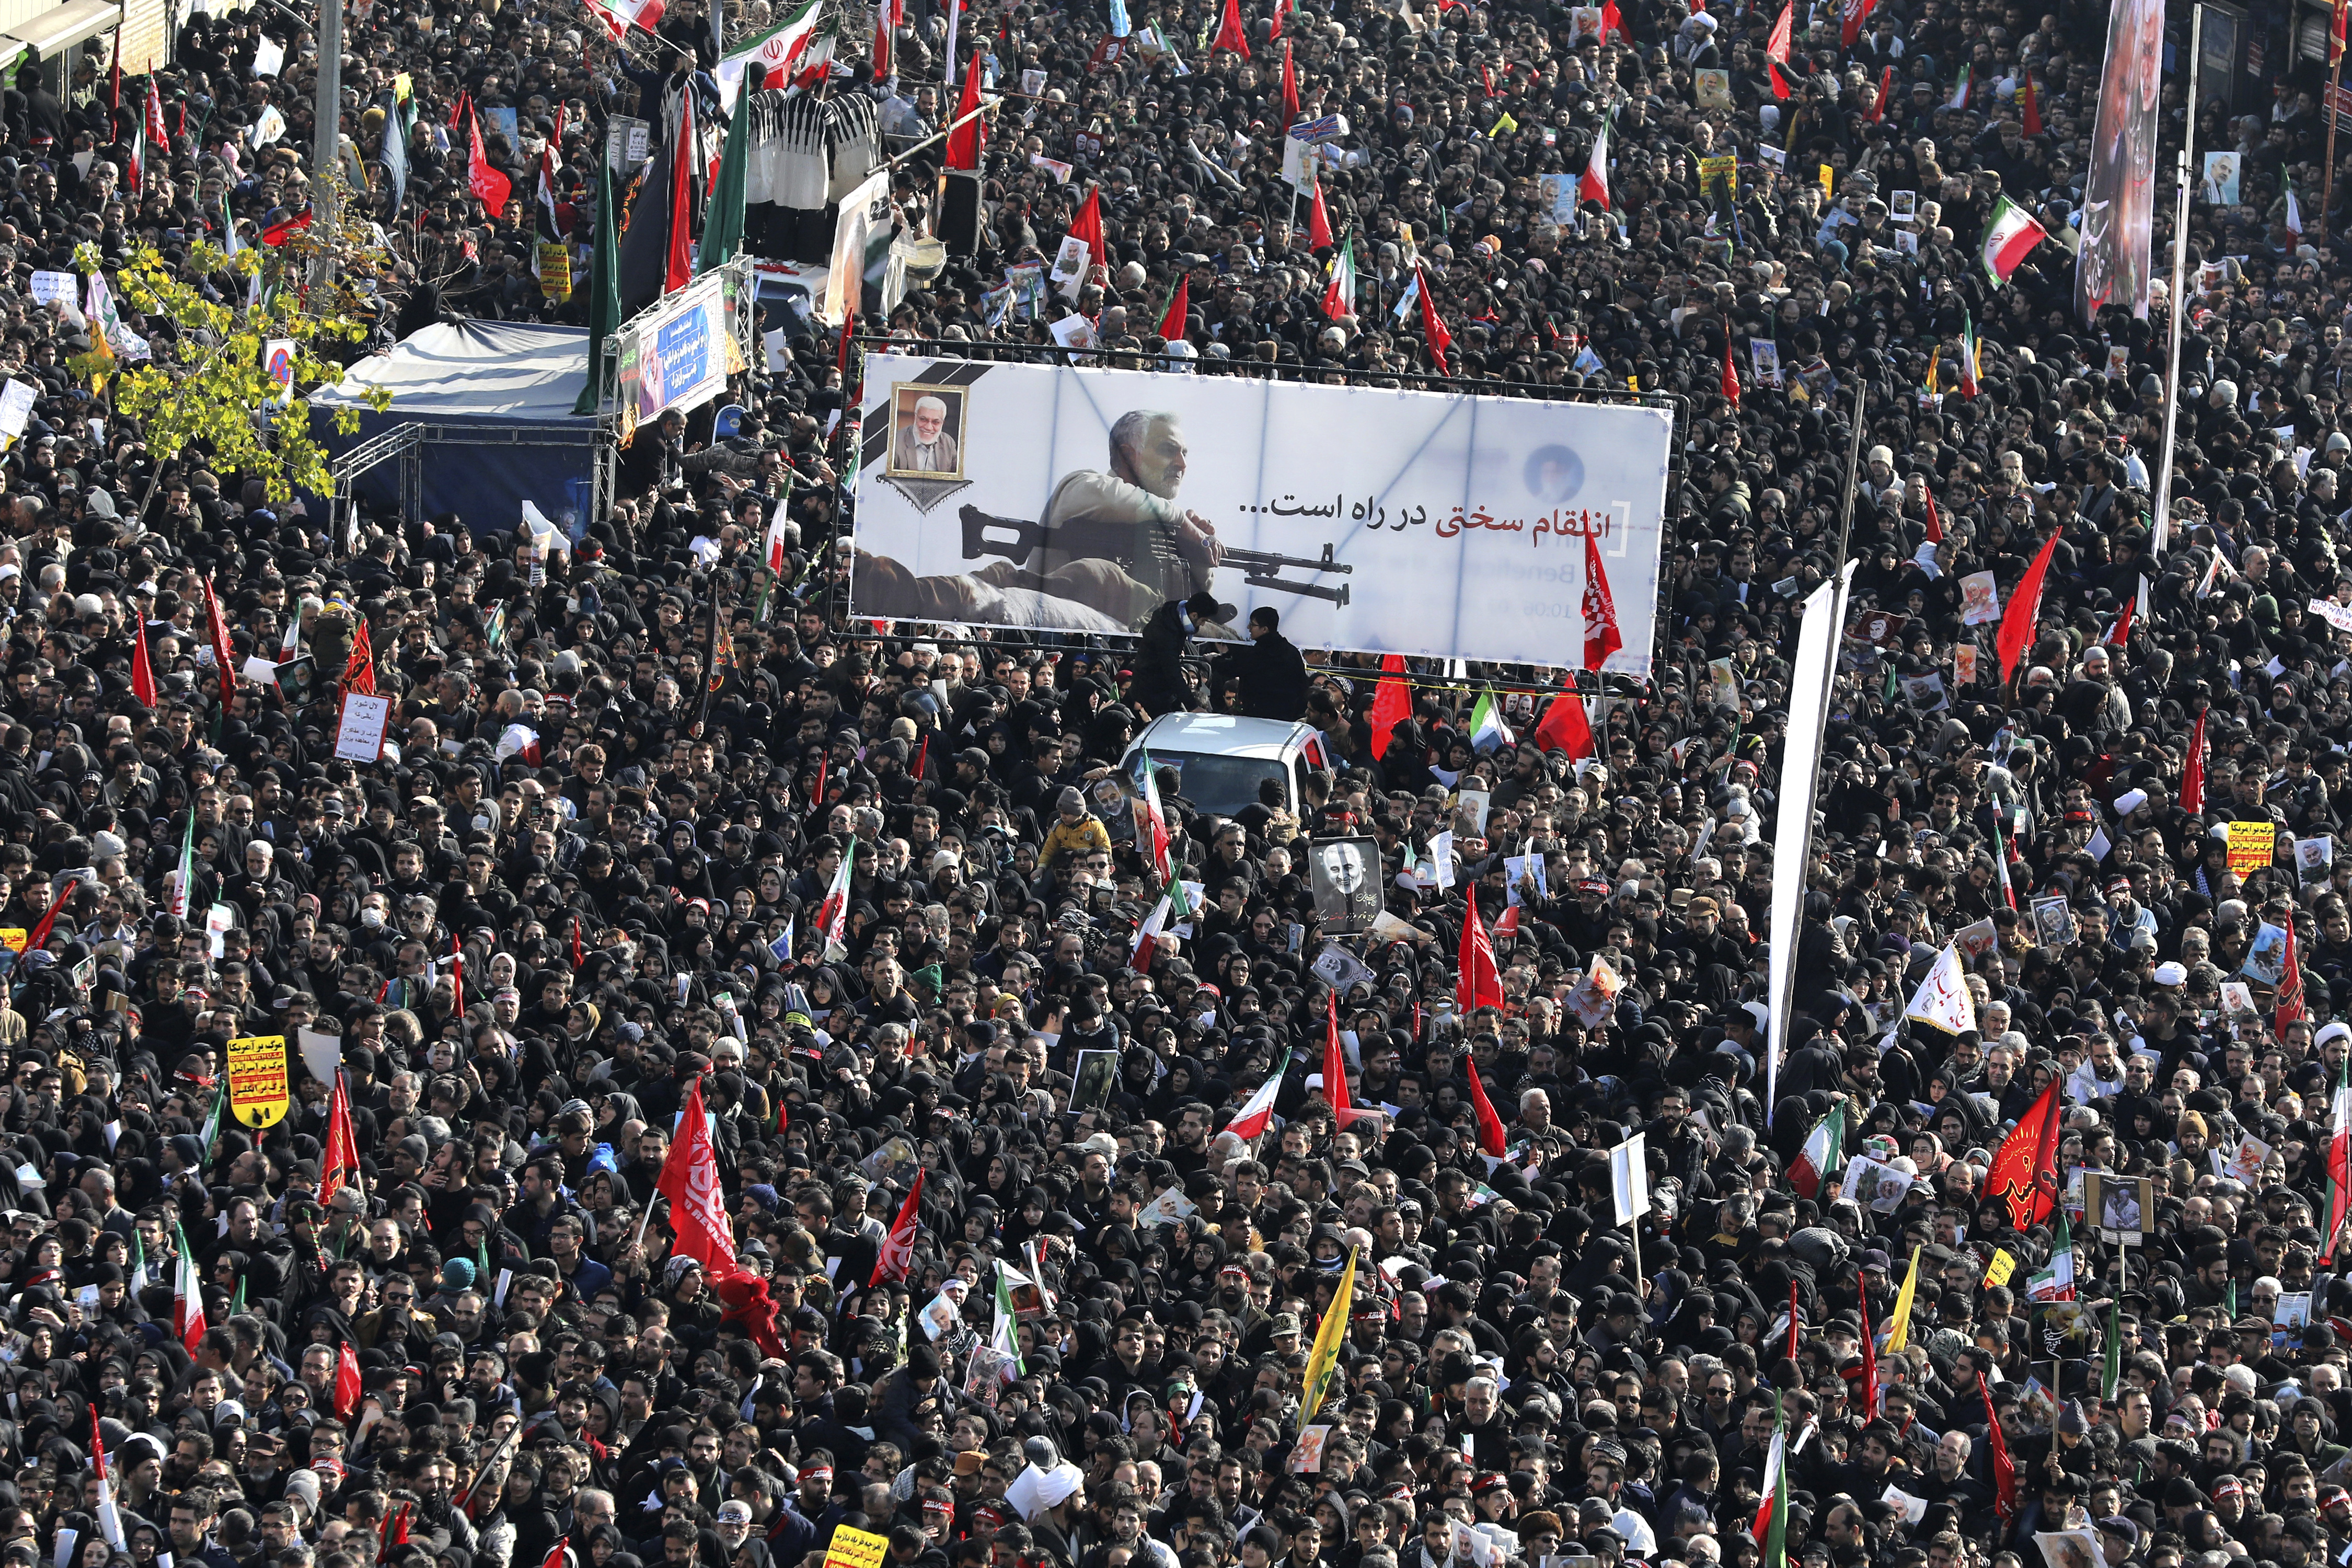 Mourners attend a funeral ceremony for Iranian Gen. Qassem Soleimani and his comrades, who were killed in Iraq in a U.S. drone strike on Friday, at the Enqelab-e-Eslami (Islamic Revolution) square in Tehran, Iran, Monday, Jan. 6, 2020. The processions mark the first time Iran honored a single man with a multi-city ceremony. Not even Ayatollah Ruhollah Khomeini, who founded the Islamic Republic, received such a processional with his death in 1989. Soleimani on Monday will lie in state at Tehran's famed Musalla mosque as the revolutionary leader did before him. (AP Photo/Ebrahim Noroozi)